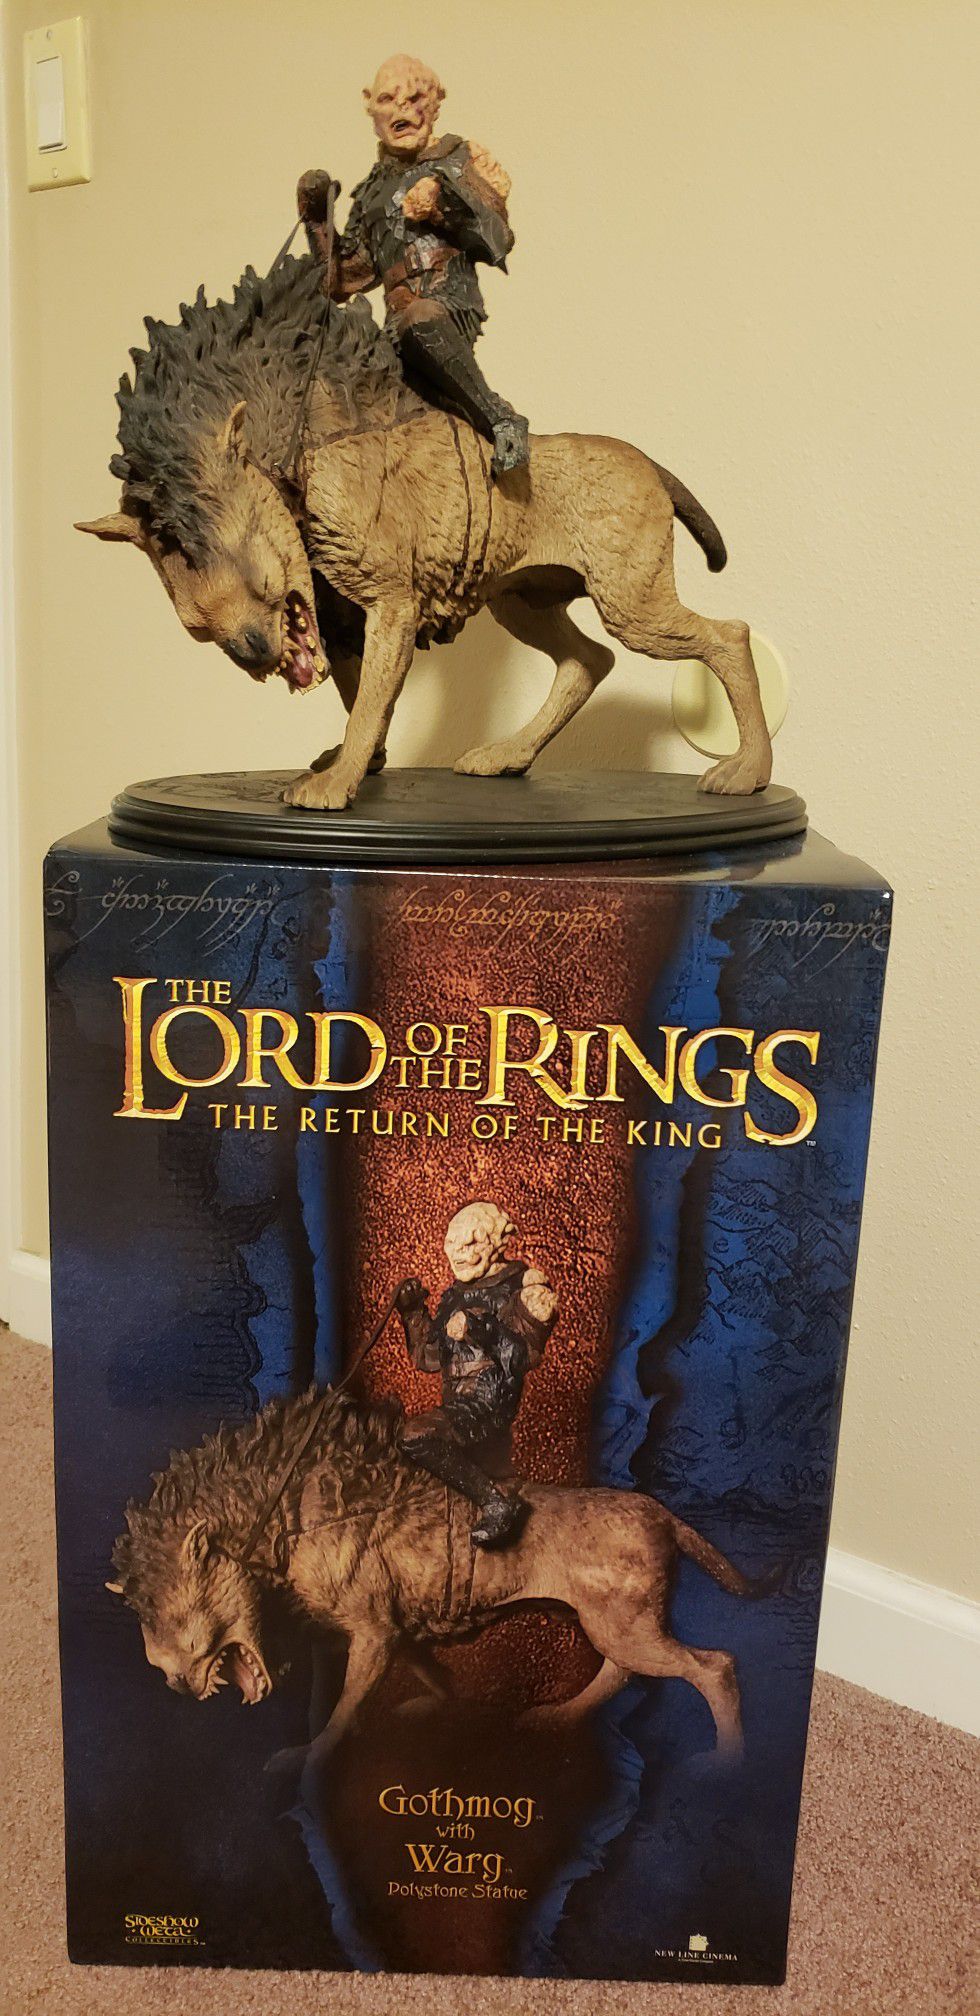 Gothmog on Warg Polystone Statue, LOTR, Sideshow Weta Collectibles, The Lord of the Rings